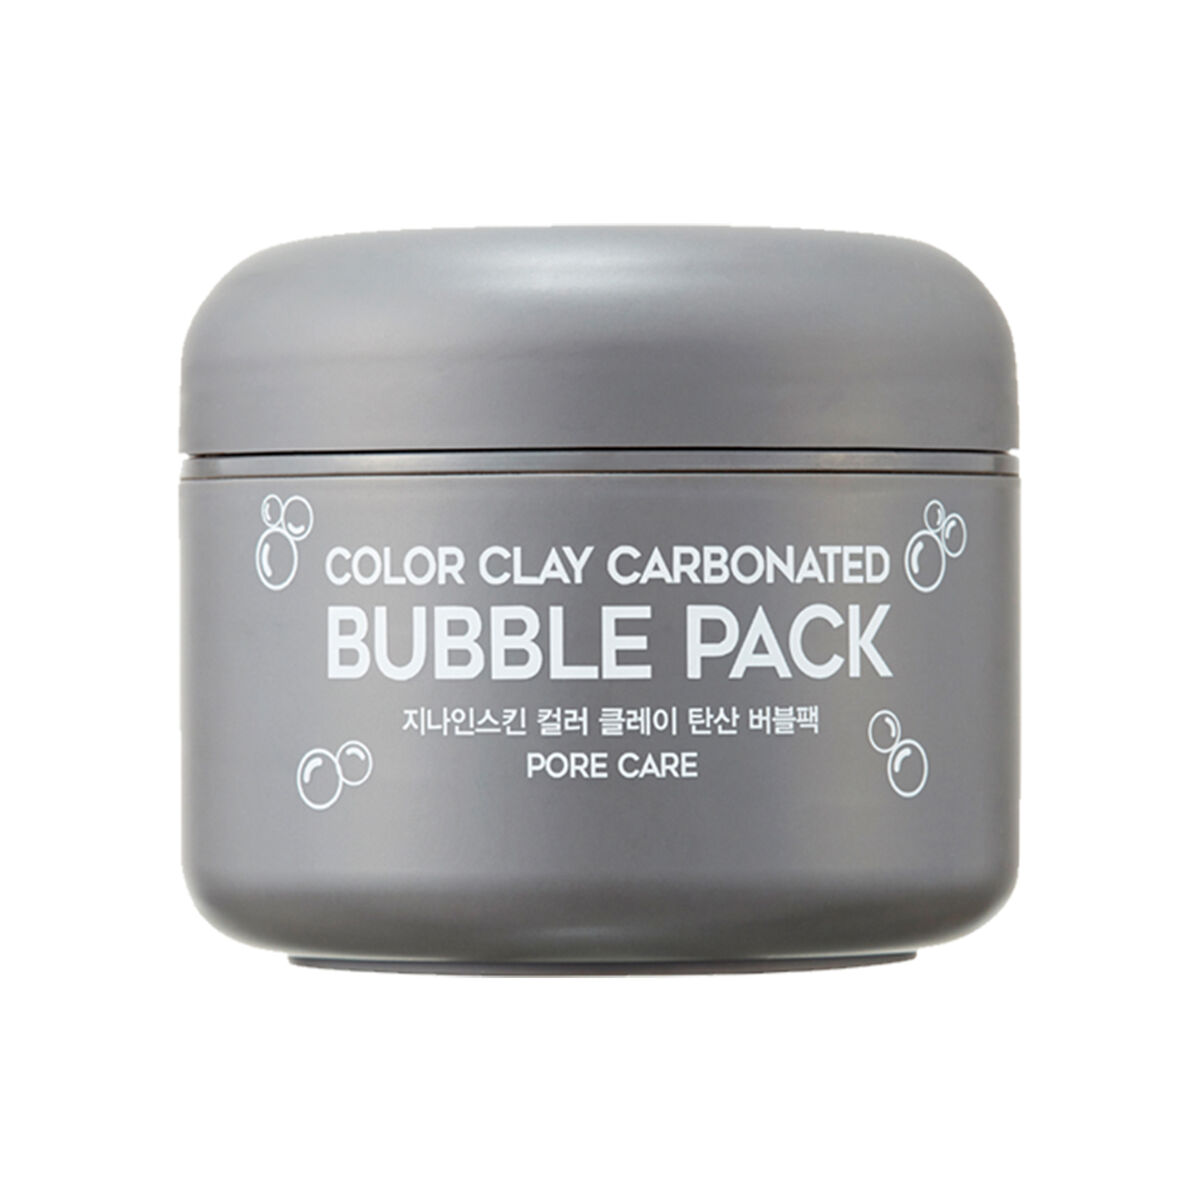 Mascarilla Facial Color Clay Carbonated Bubble Pack G9Skin